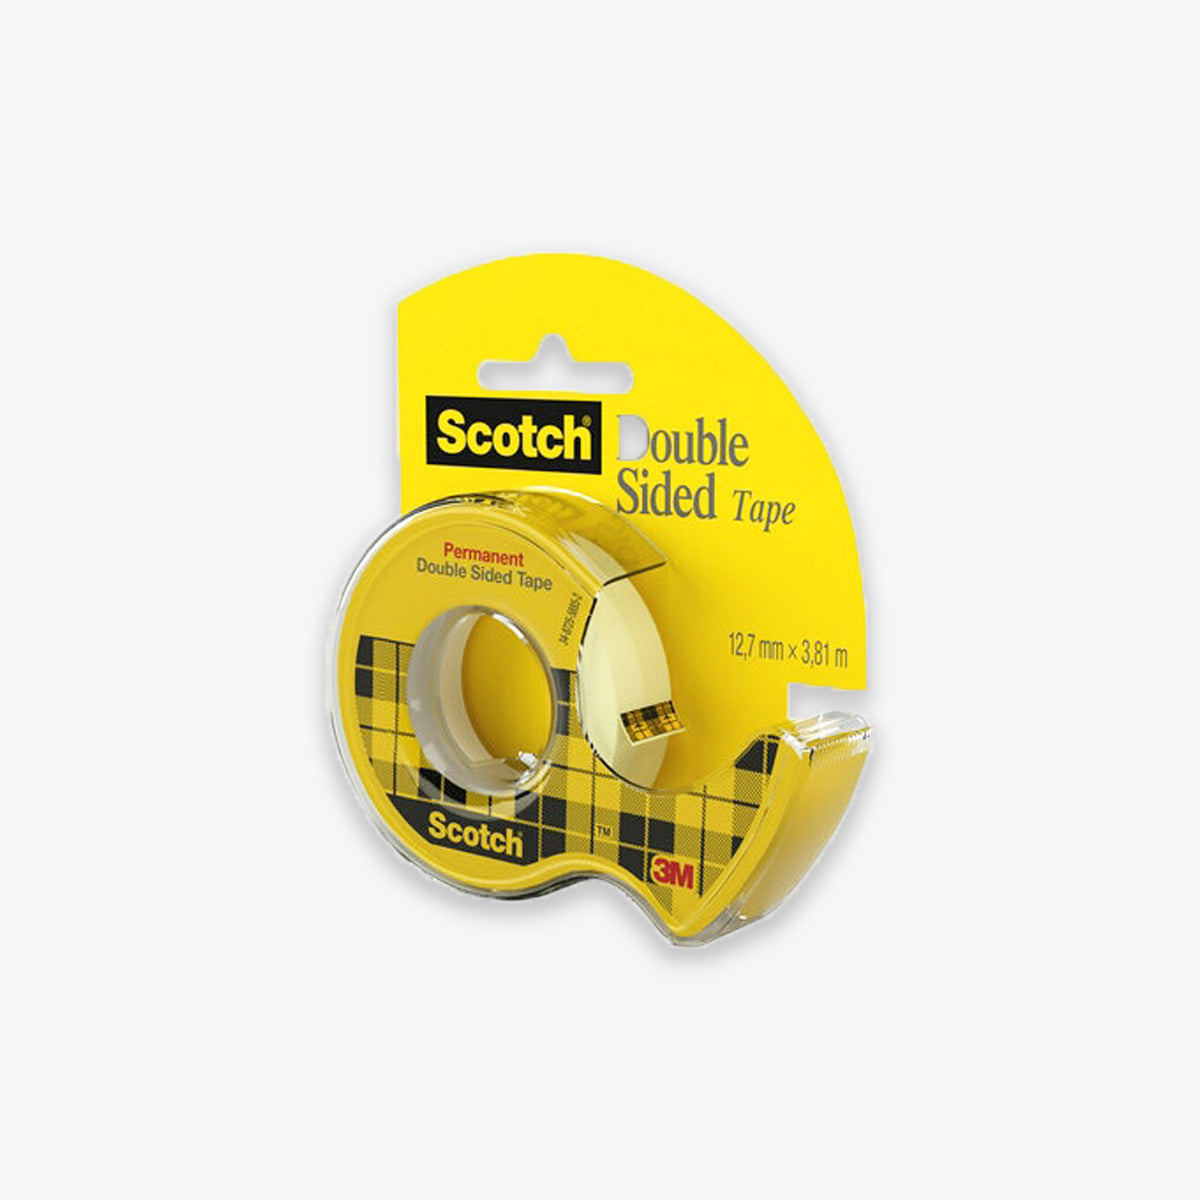 products/Doublesidedtapew.dispenser_Scotch_3M_02.jpg